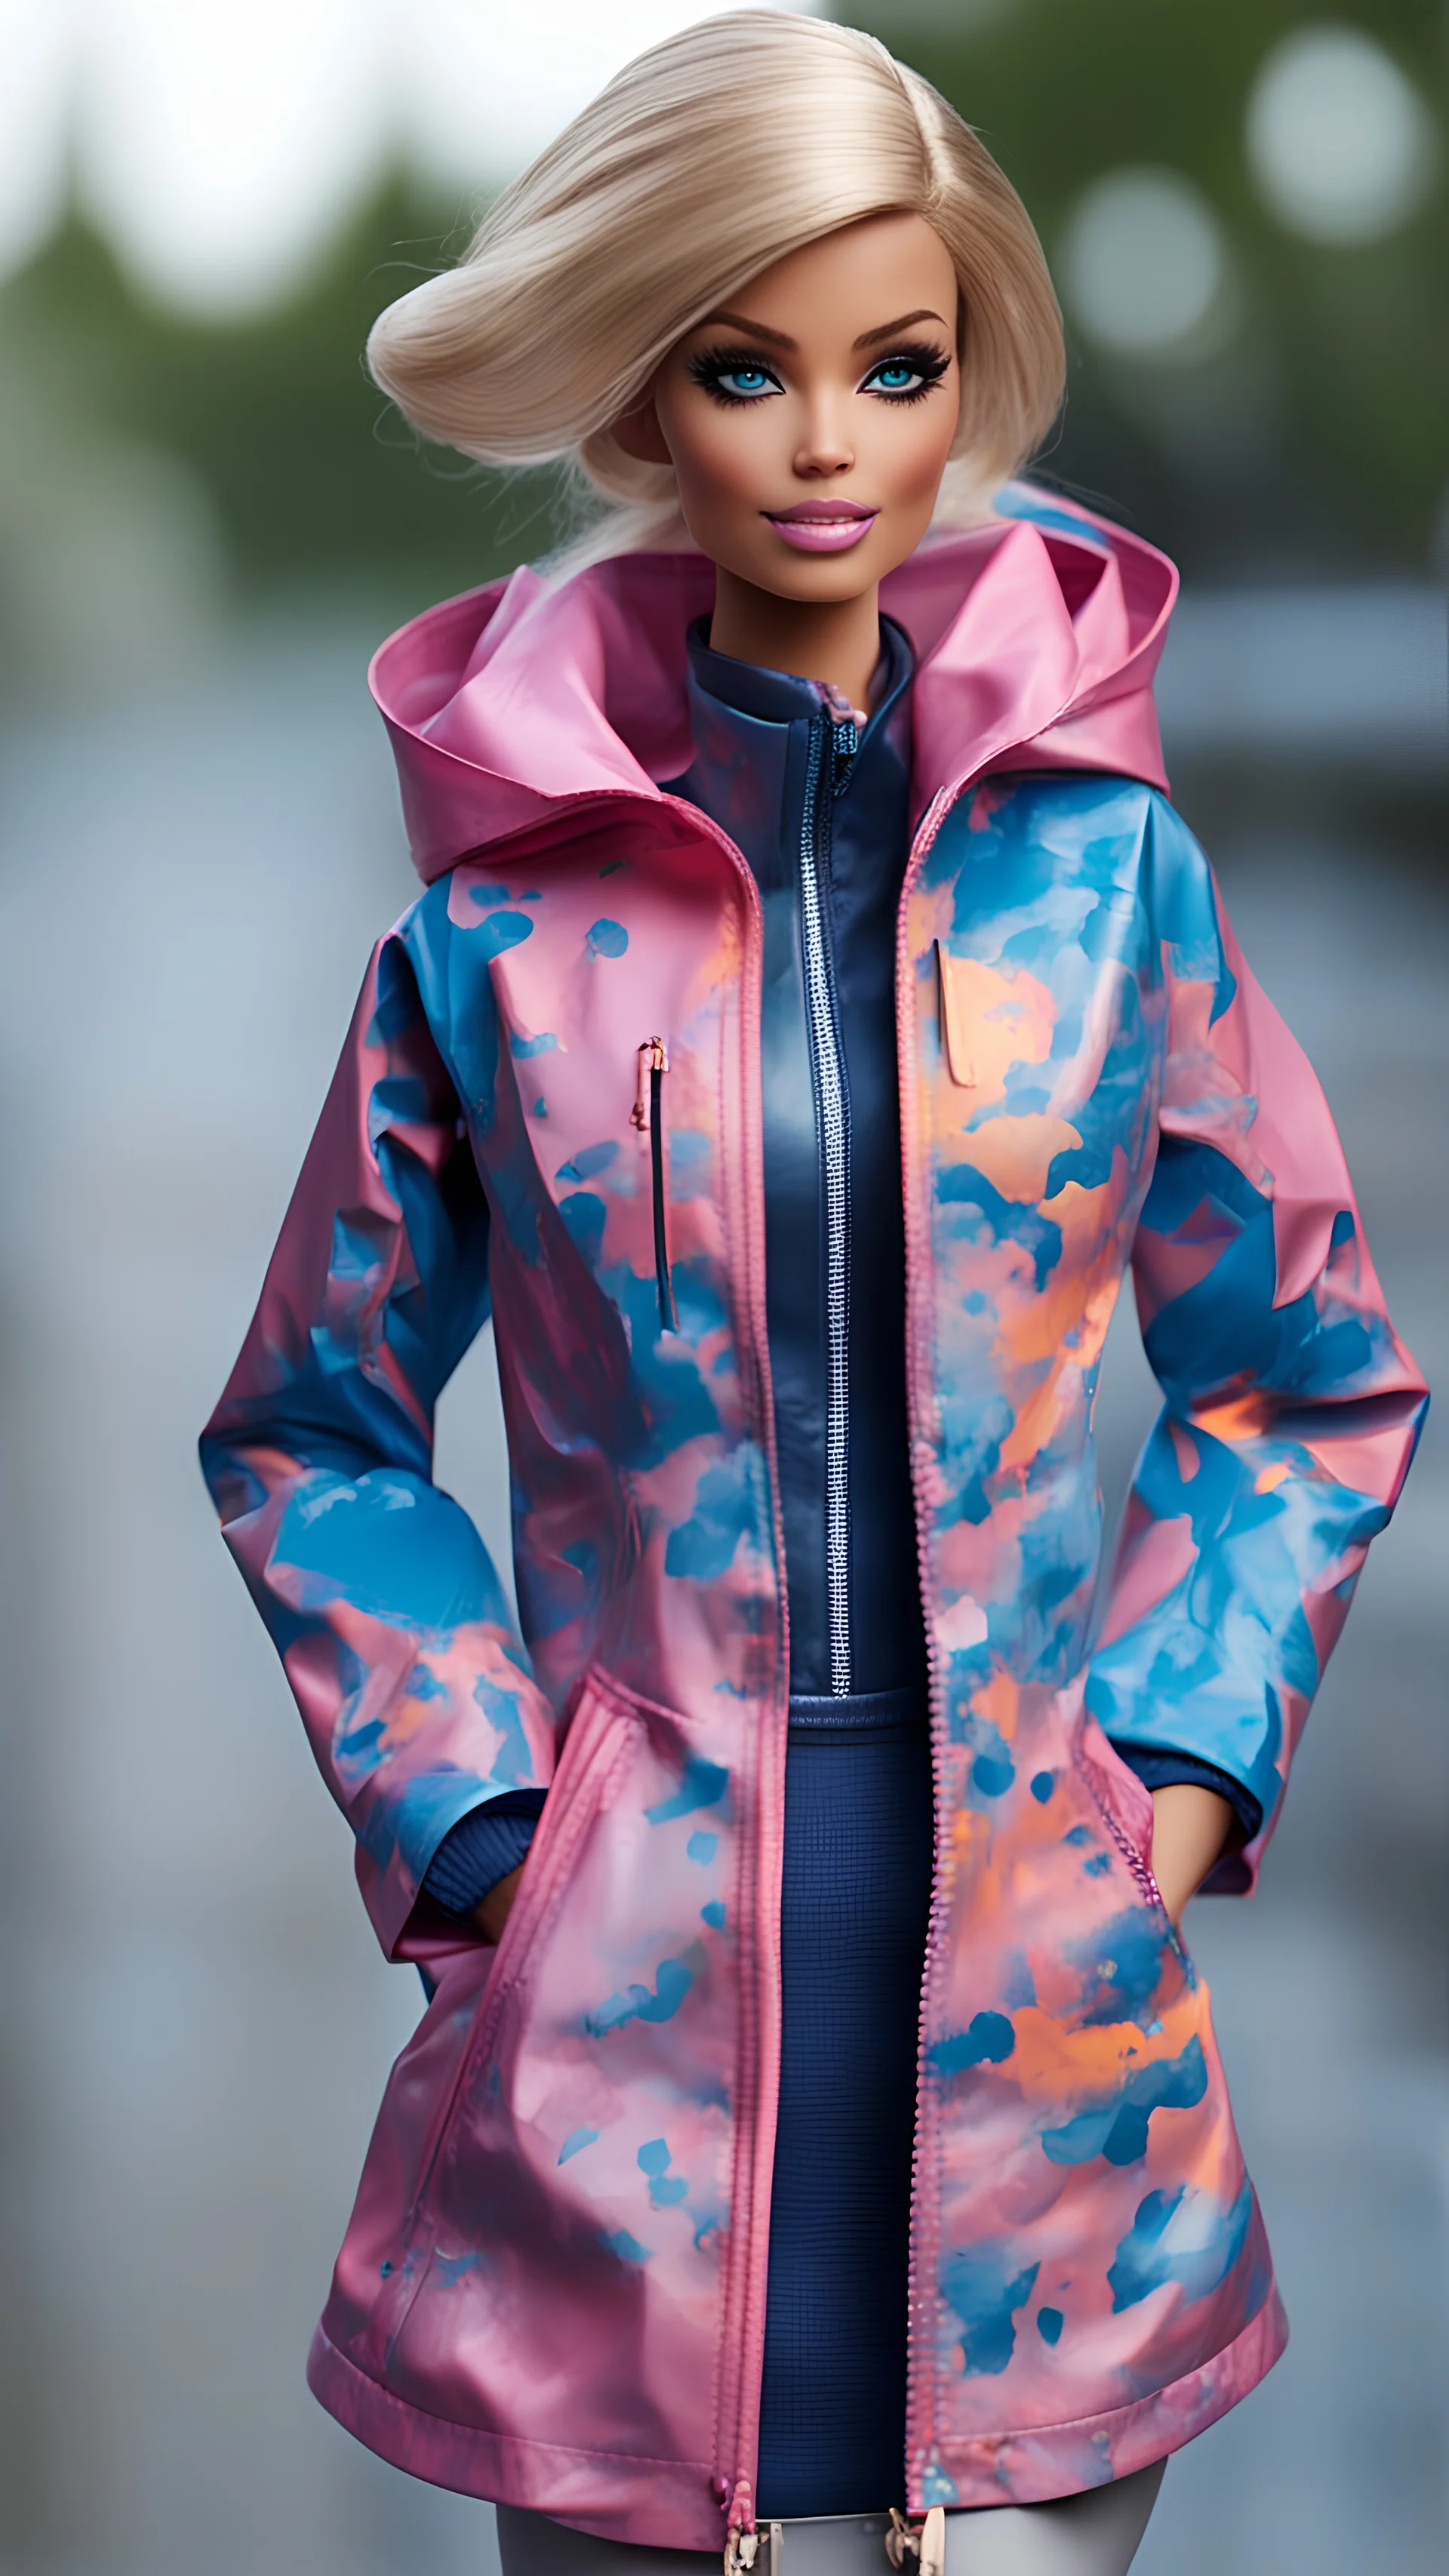 outfit ideas for one person Barbie doll full grow. Weatherproof It Toughen up your sporty outfit with a long rain coat and loads of inky leather. Break up the look with hints of blue electric color and cool prints